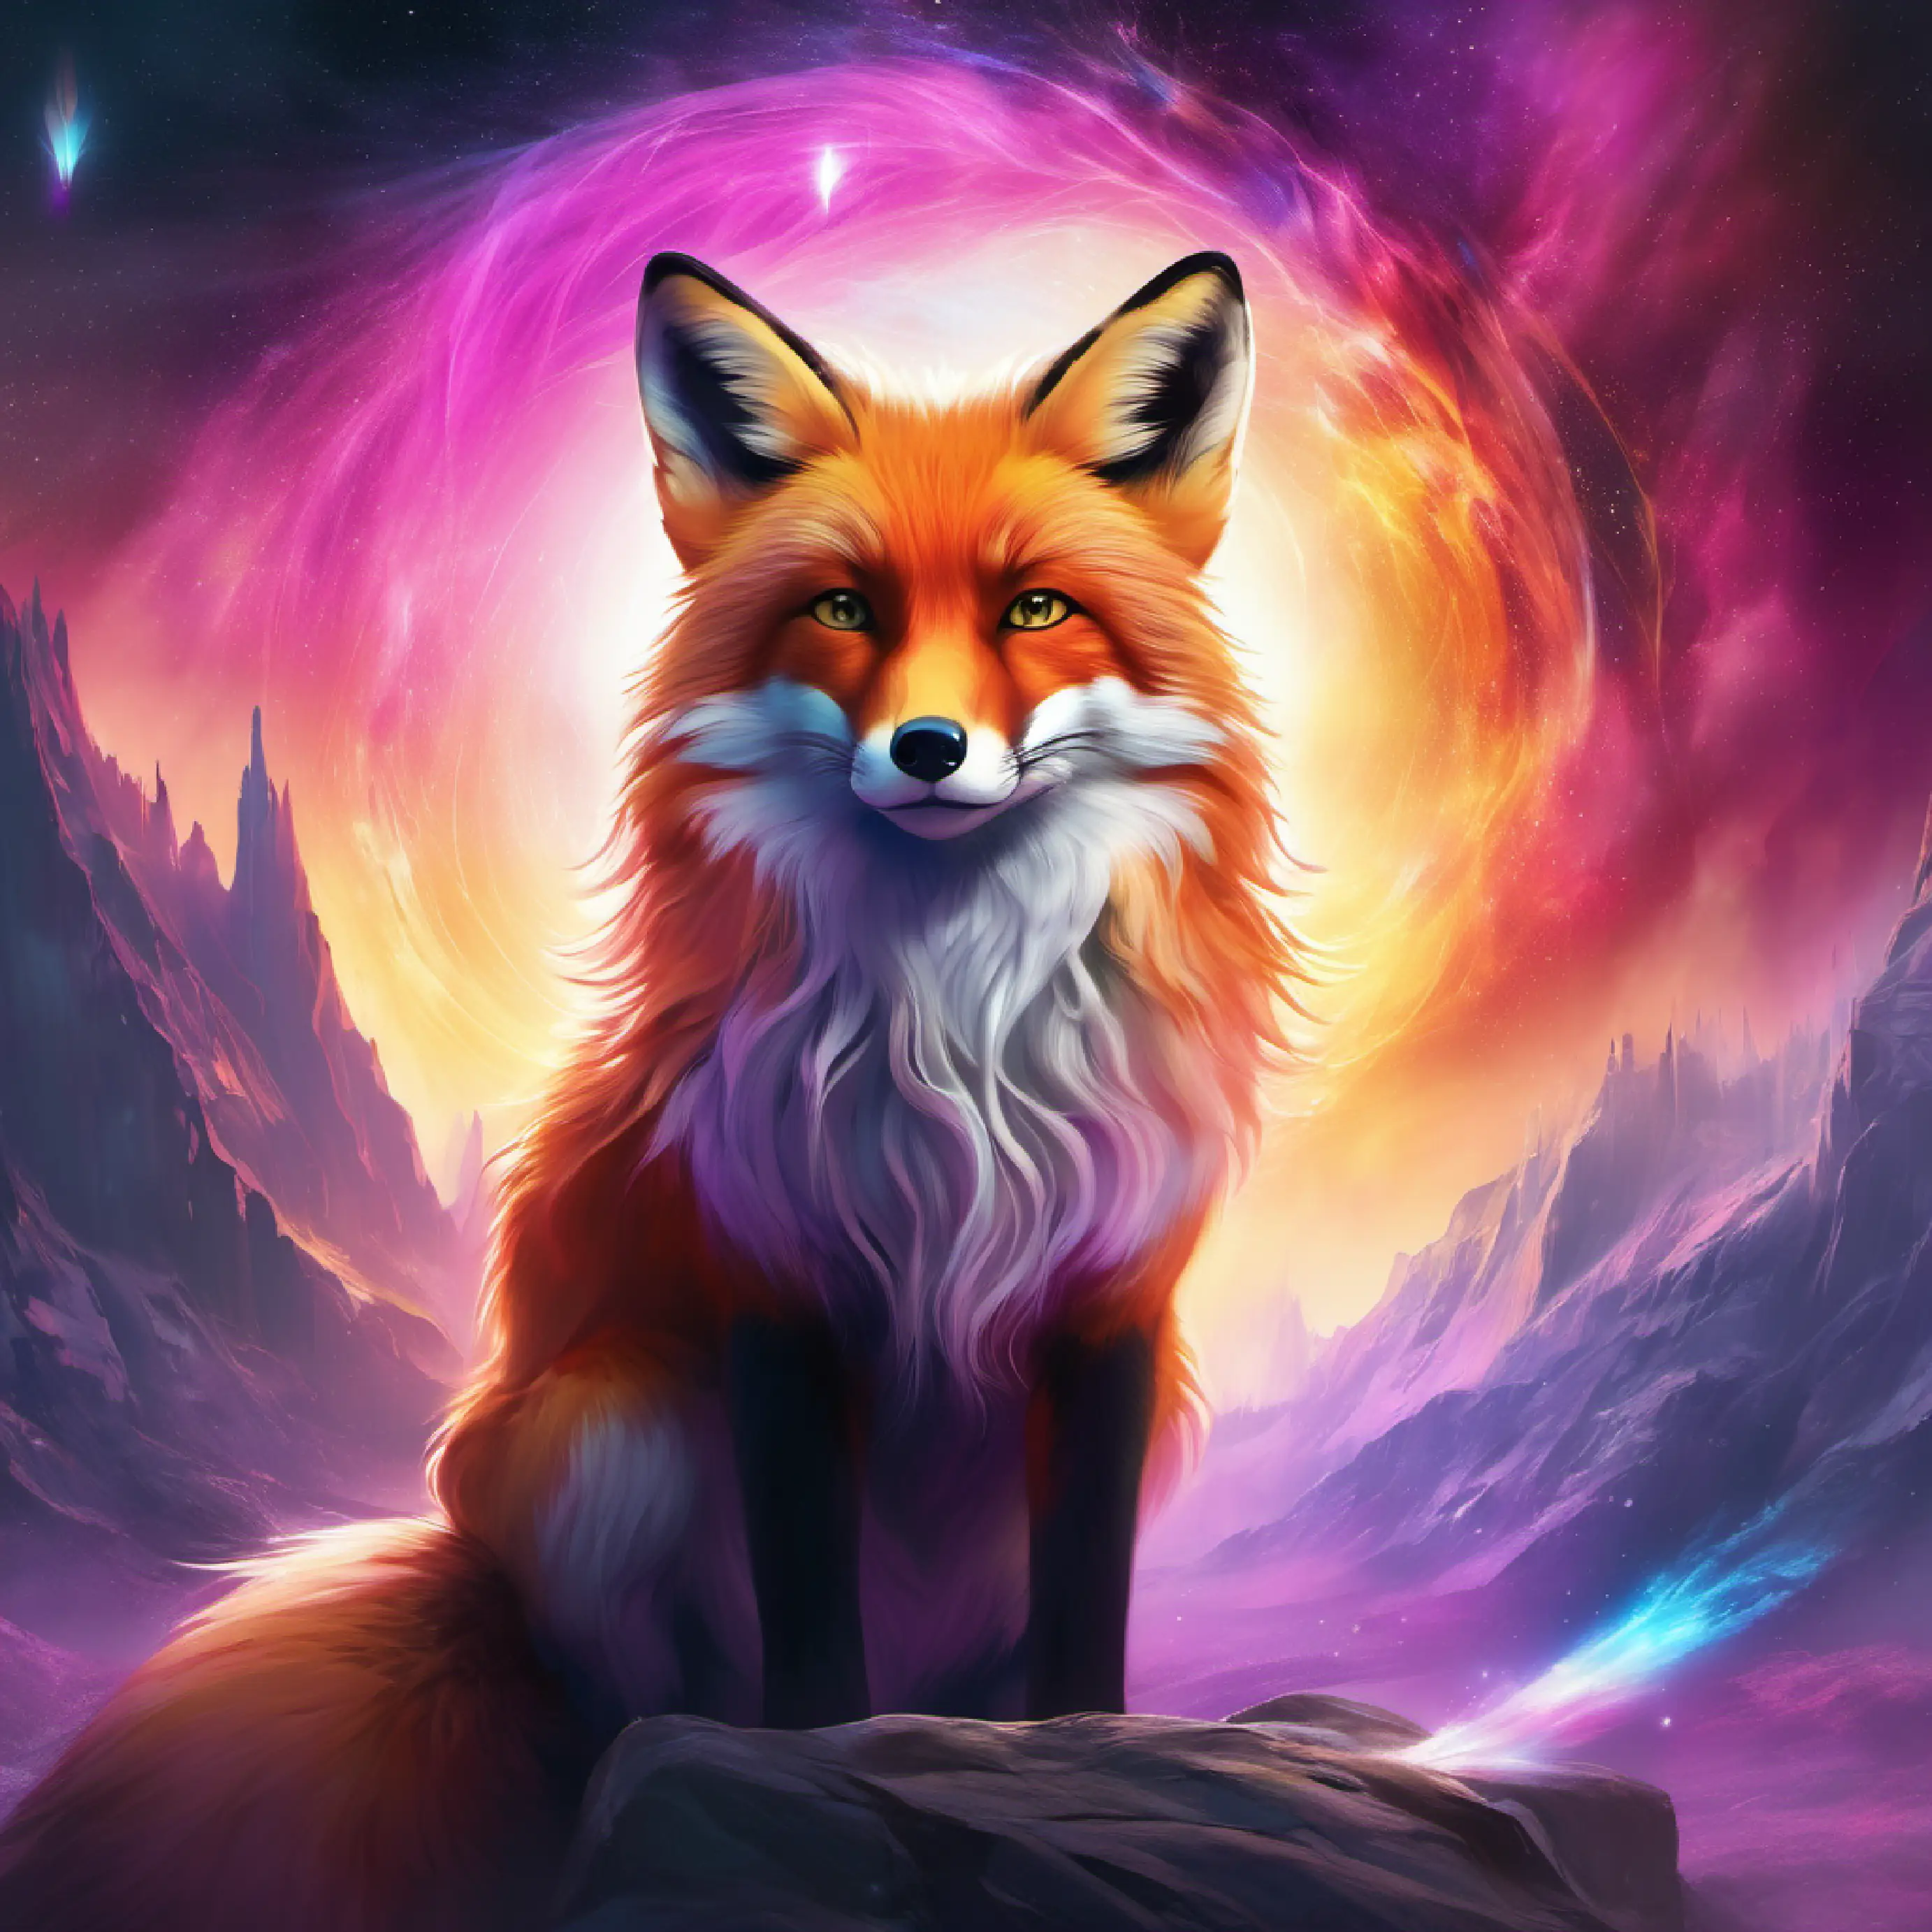 Fox attempts to answer Aurora Spirit with ever-changing colorful aura, wise and kind's riddle.